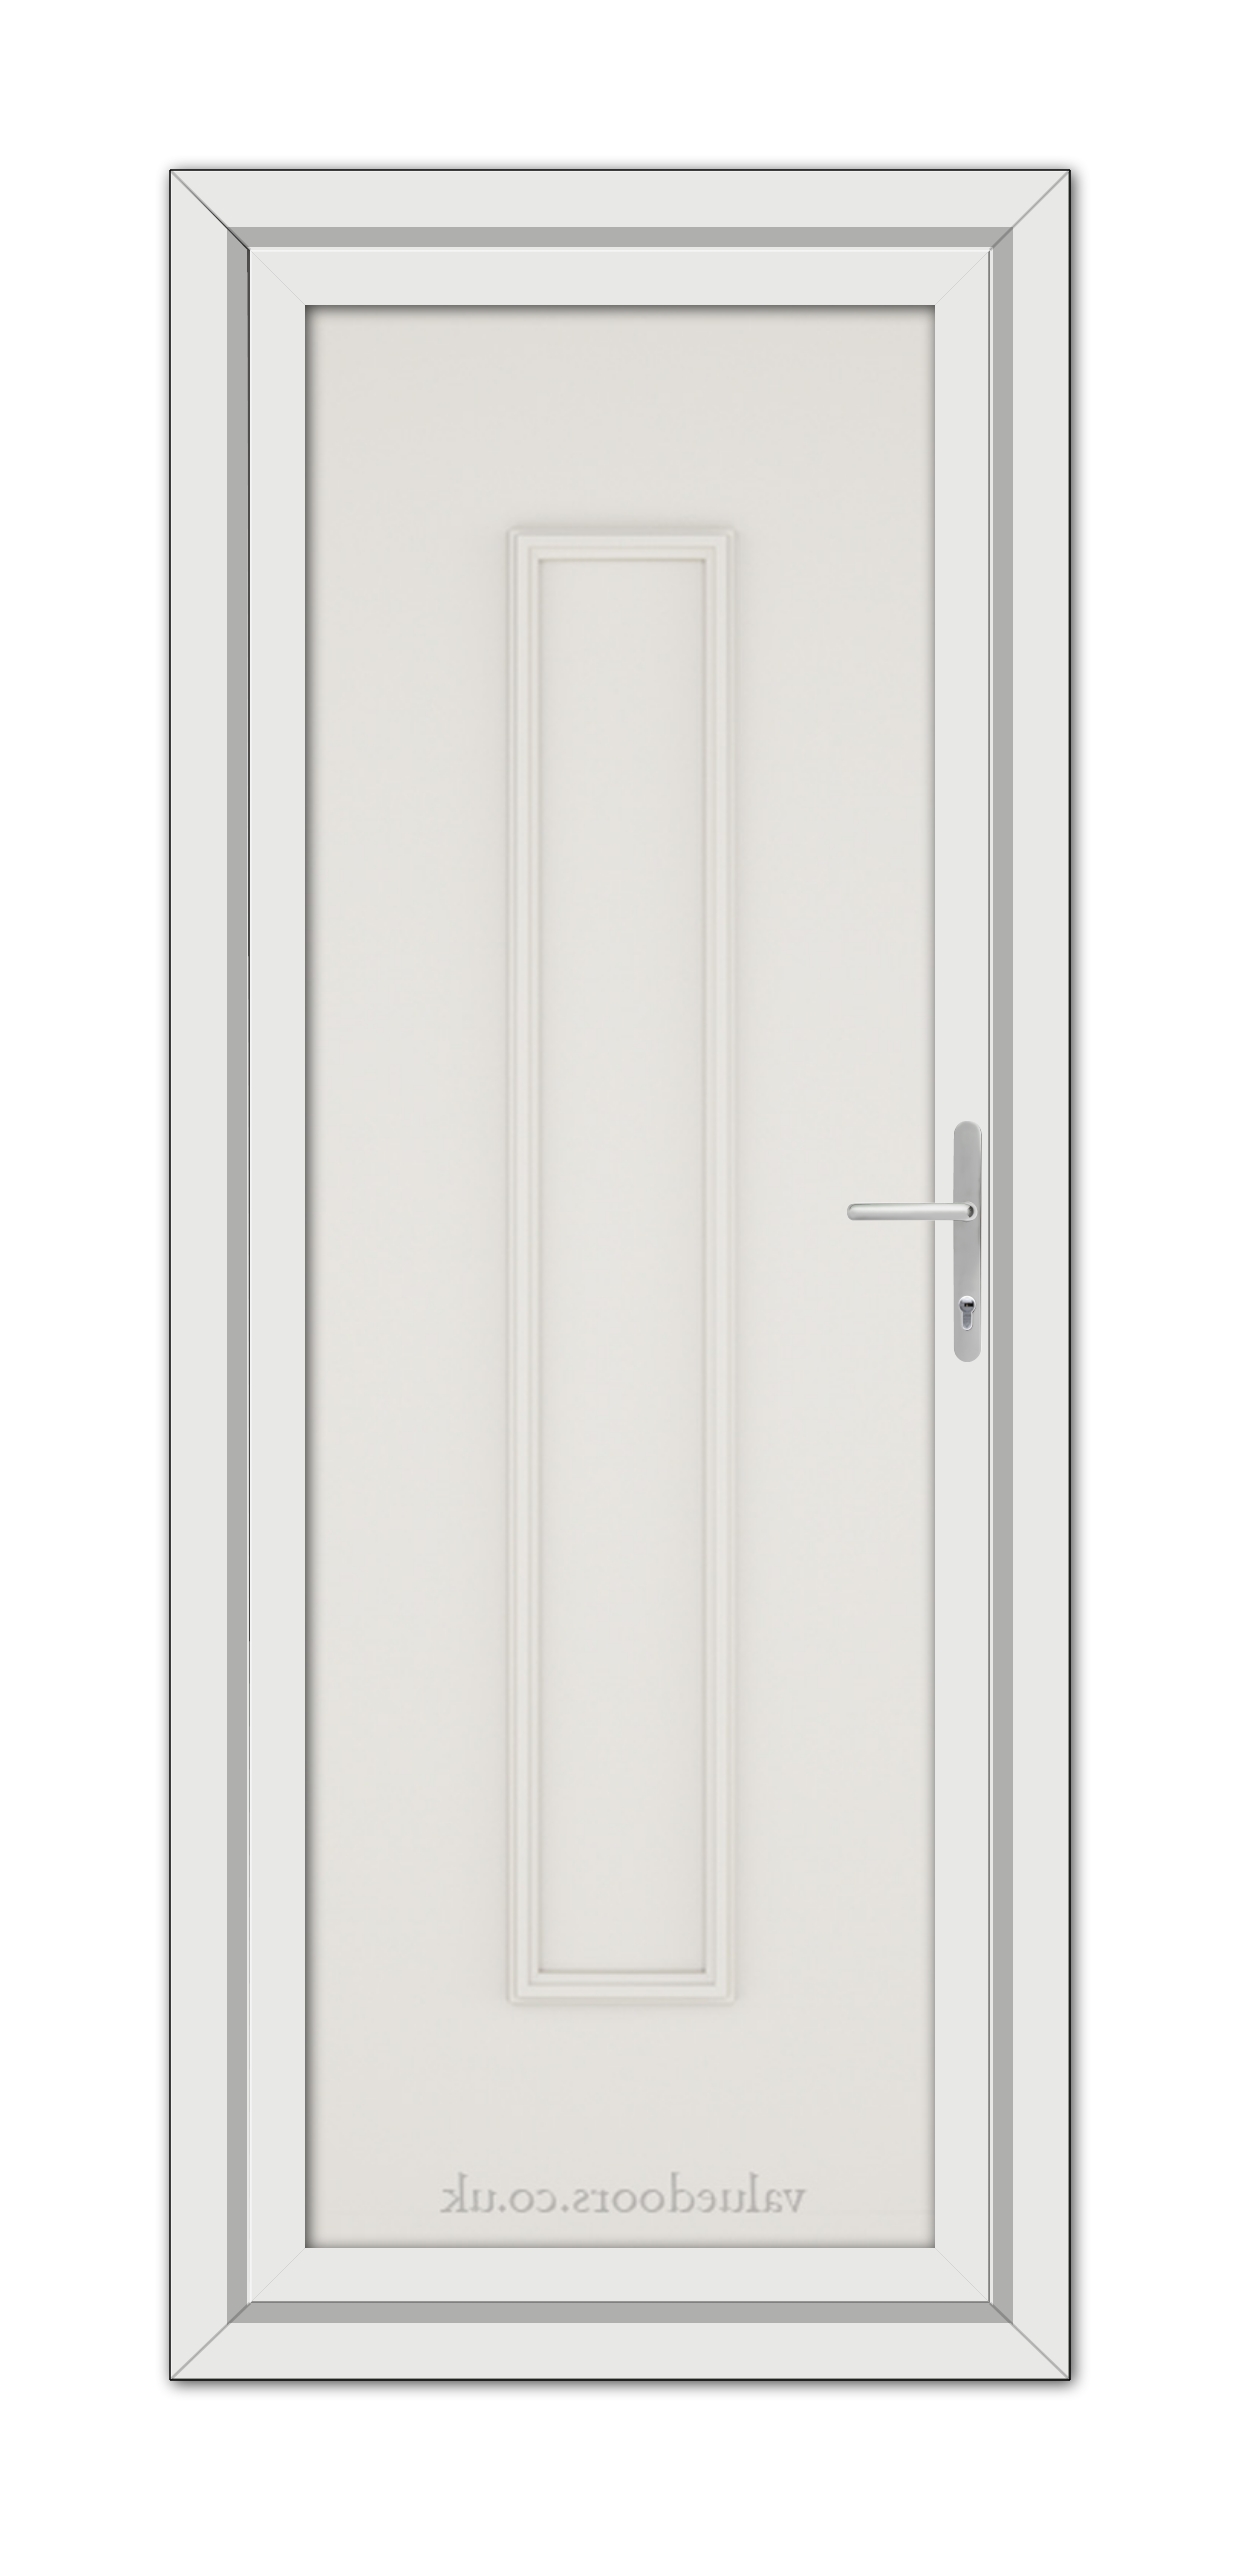 White Cream Rome Solid uPVC Door with a vertical handle, set in a frame, viewed from the front.